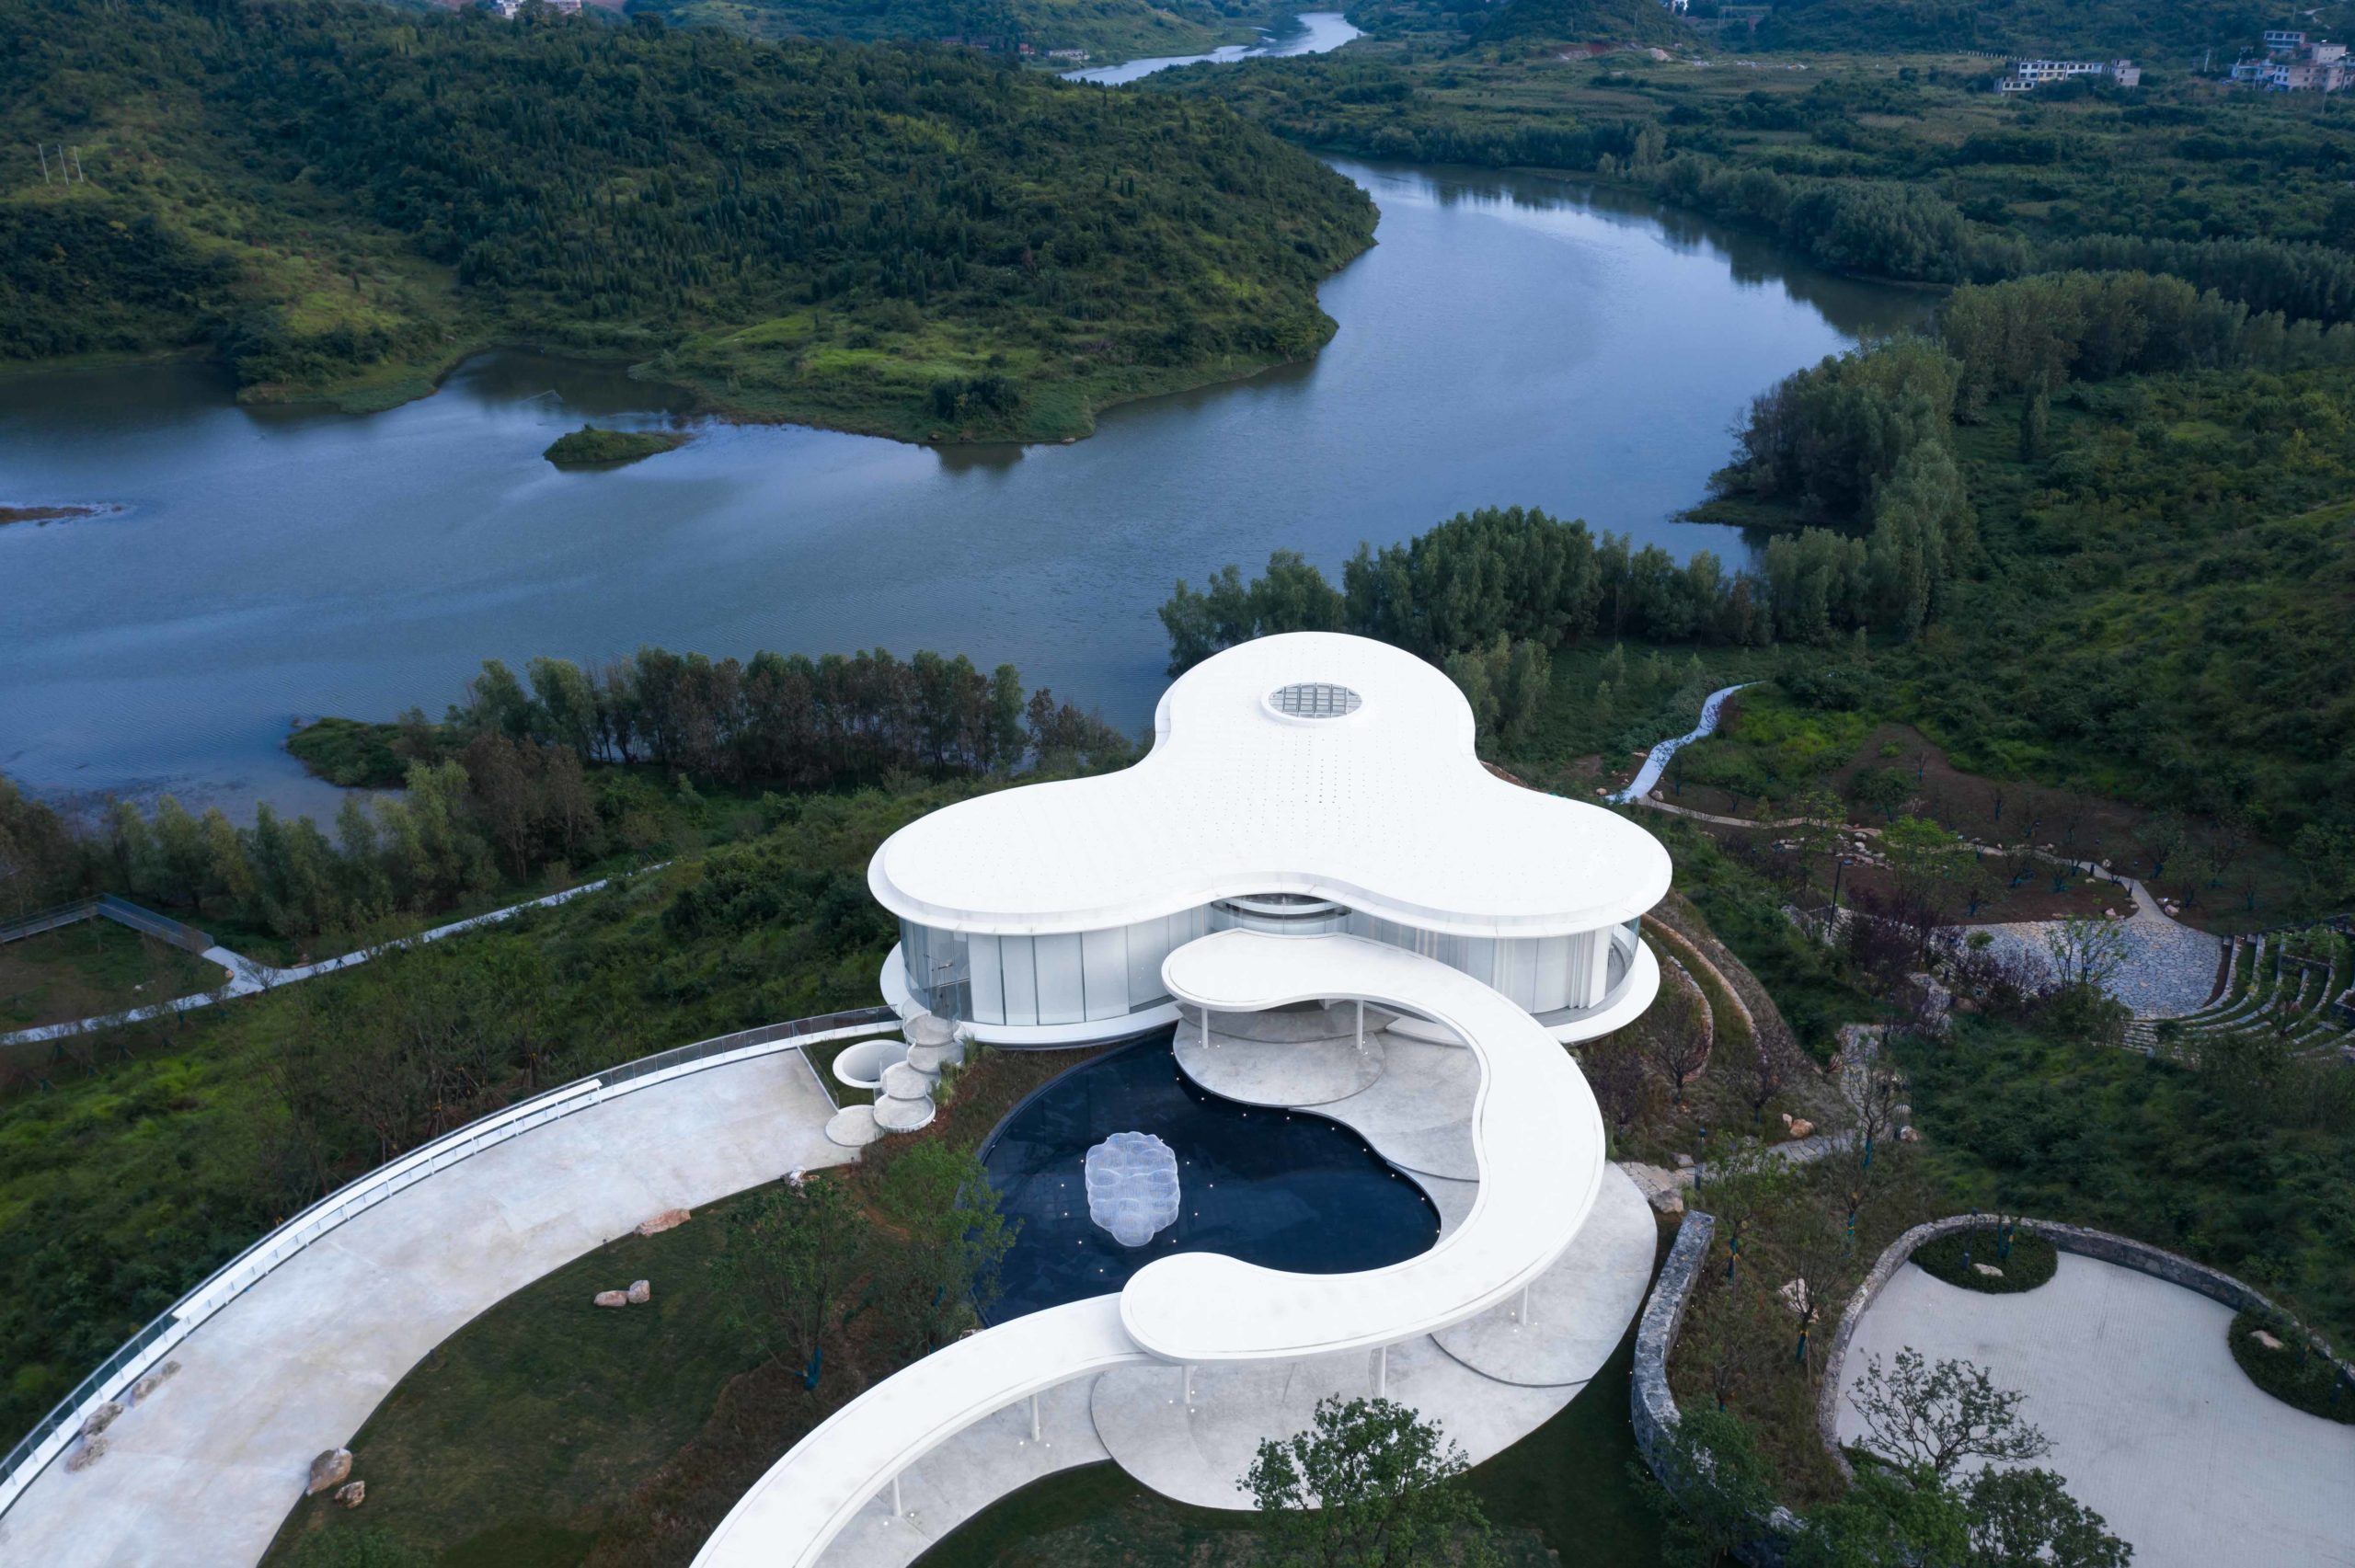 Cloud Art Museum By Challenge Design Guizhou China 1 Scaled 